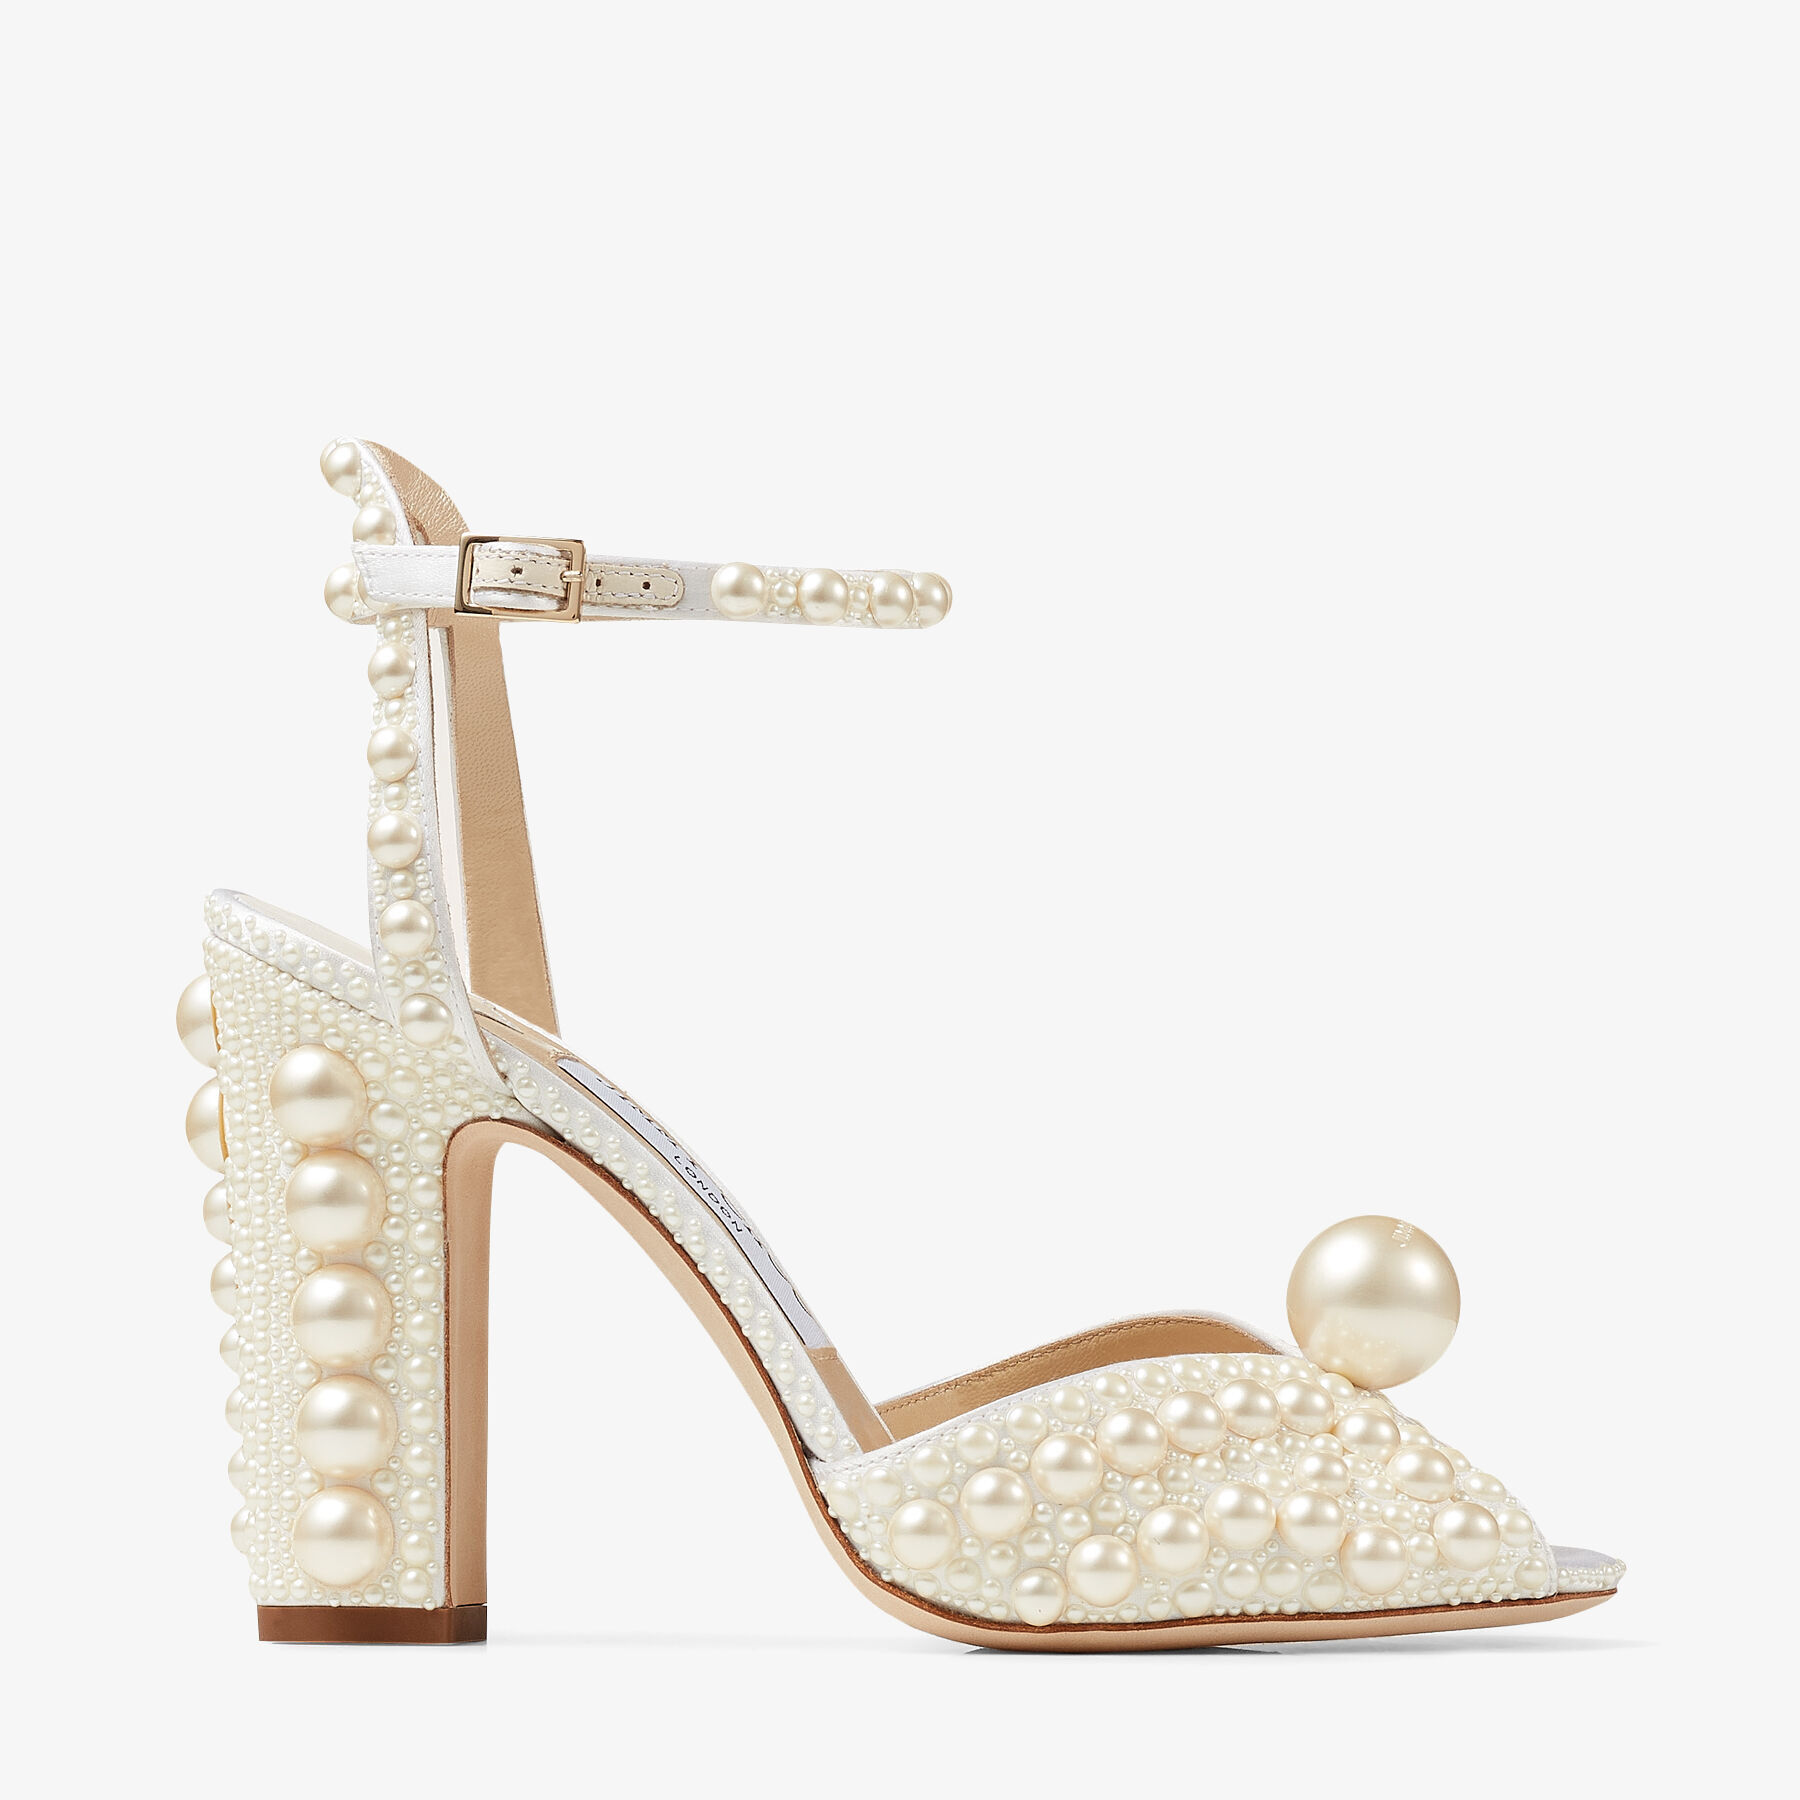 White Satin Sandals with All-Over Pearl Embellishment | SACARIA